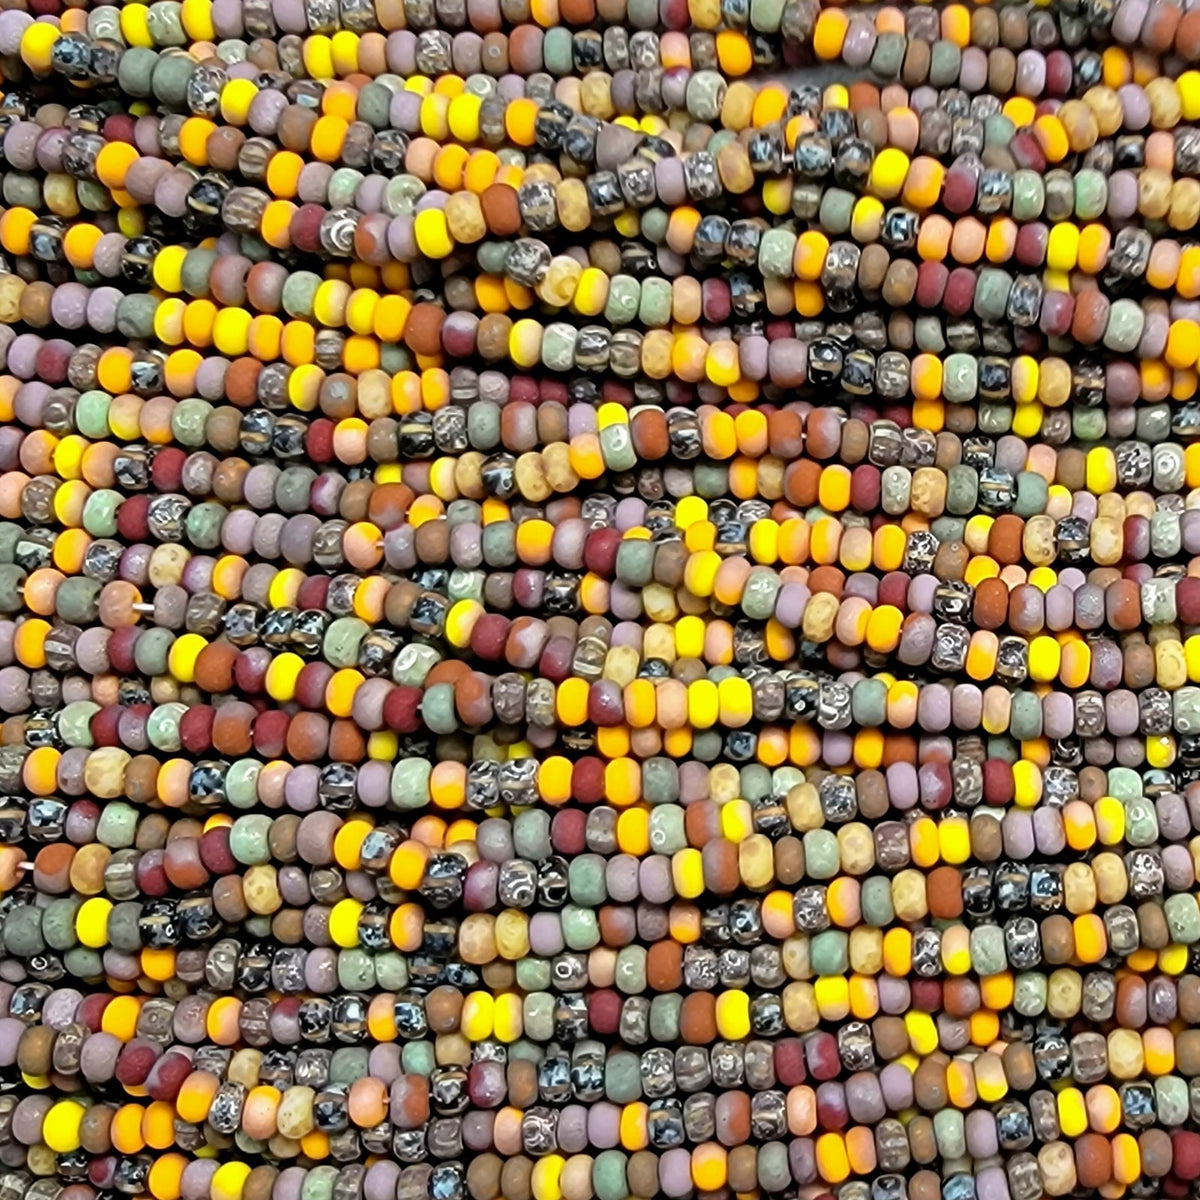 4mm Czech Aged Picasso Beads, Wrap Bracelet Beads, Glass Beads, Seed Beads,  Multicolored Beads, Patterned Beads 